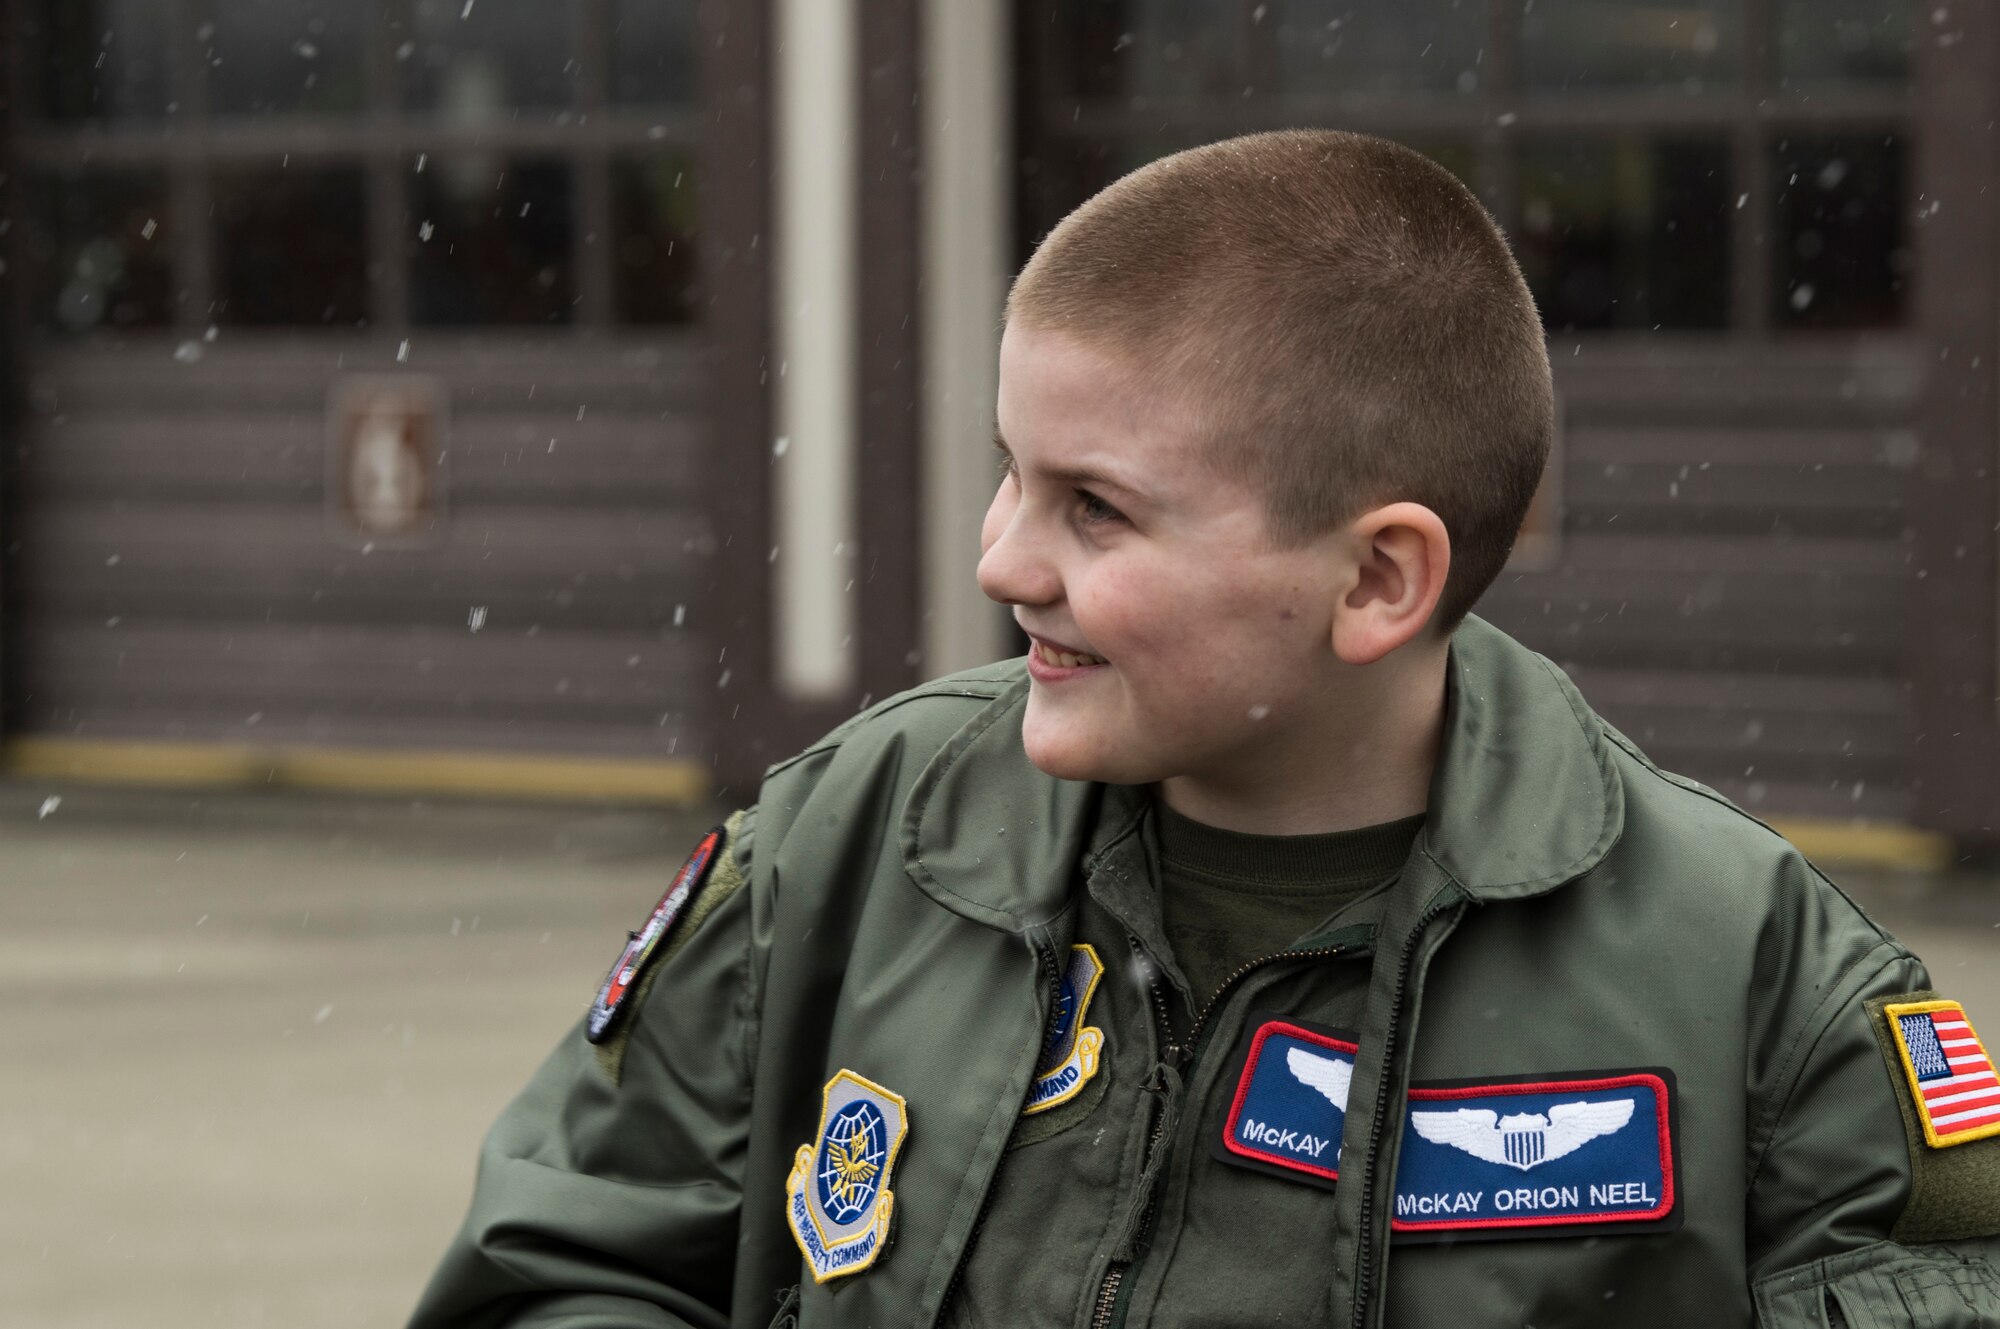 McKay Neel, McChord’s newest Pilot for a Day participant, learns about McChord’s fire station during a tour of McChord Field at Joint Base Lewis-McChord, Wash., Feb. 20, 2018. McKay received his own flight suit and jacket, 4th Airlift Squadron patches and coin and a C-17 Globemaster III model during his day as a 4th AS pilot. (U.S. Air Force photo by Senior Airman Tryphena Mayhugh)